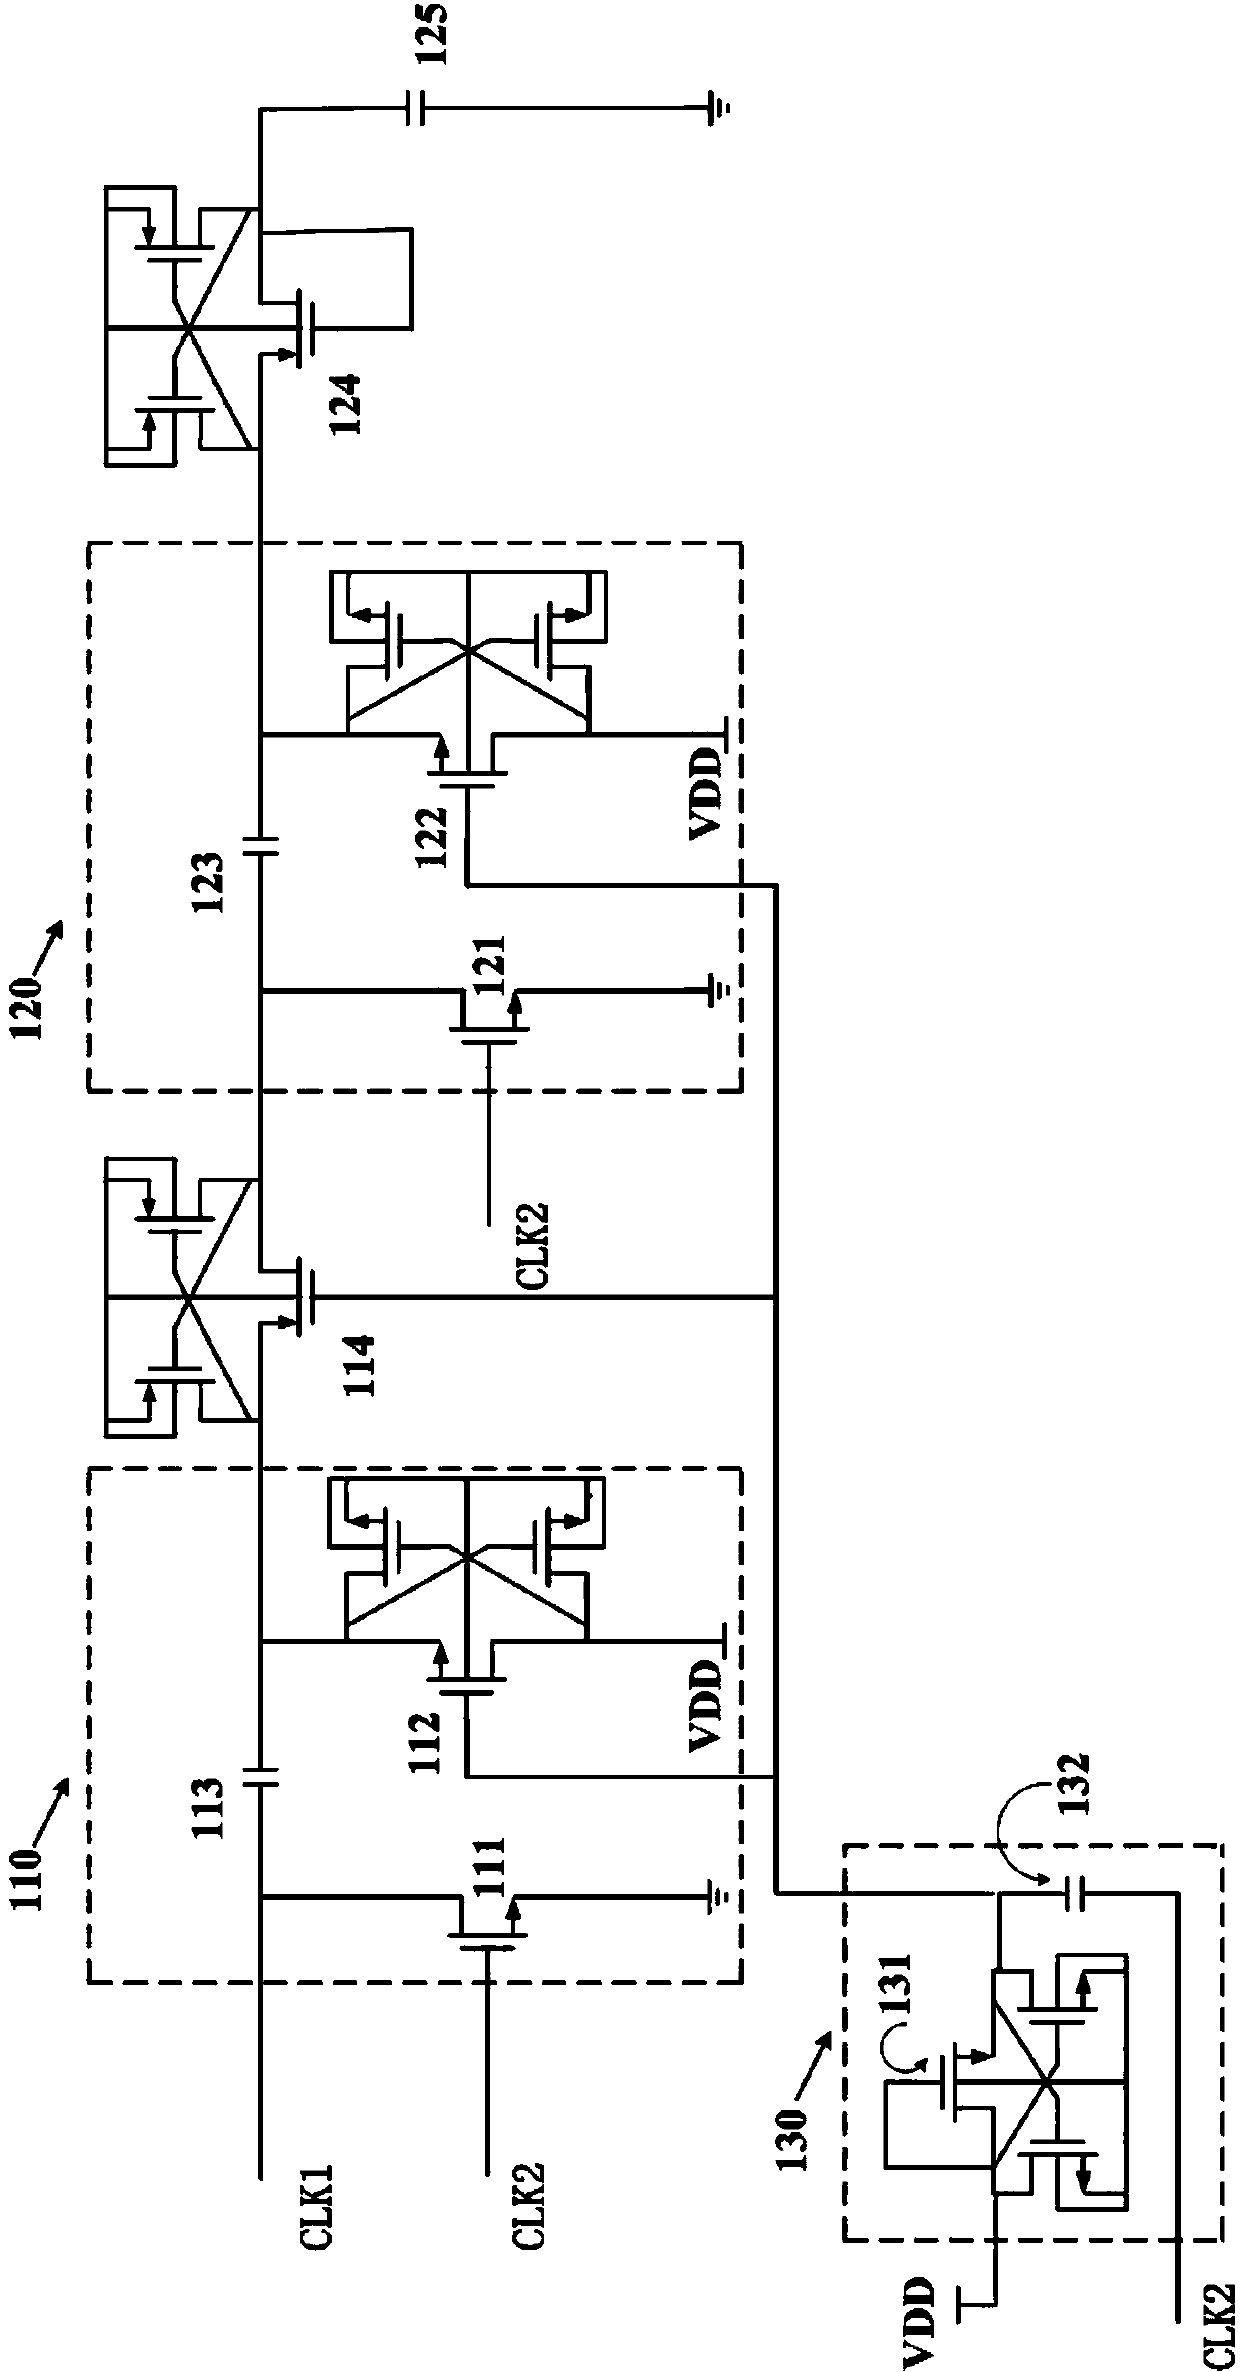 TDDB (time dependent dielectric breakdown) failure early warning circuit